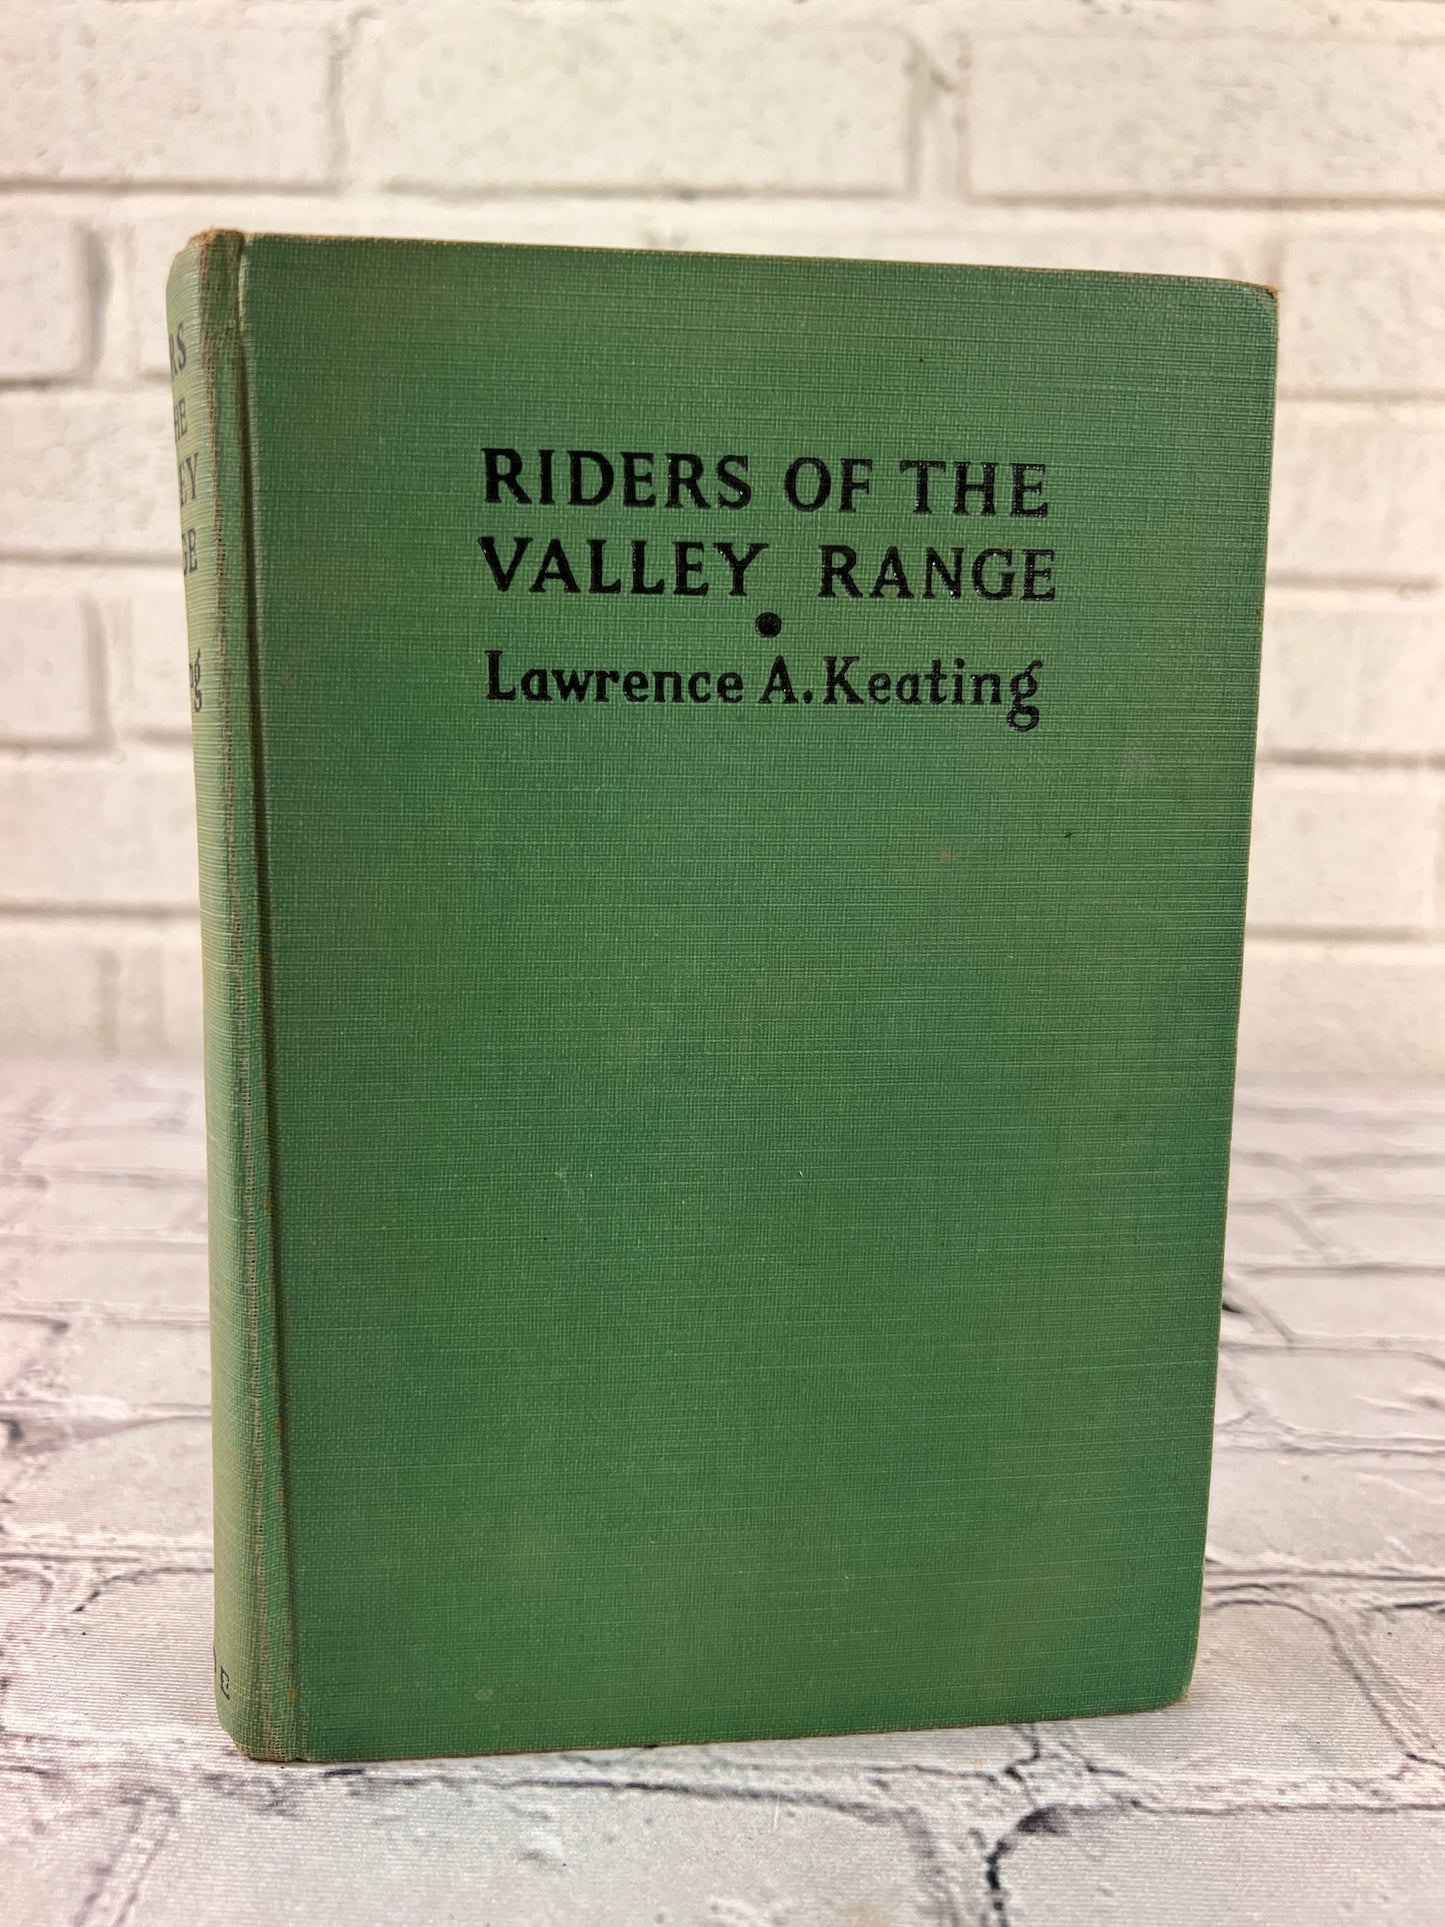 Riders of the Valley Range by Lawrence A. Keating [1932]